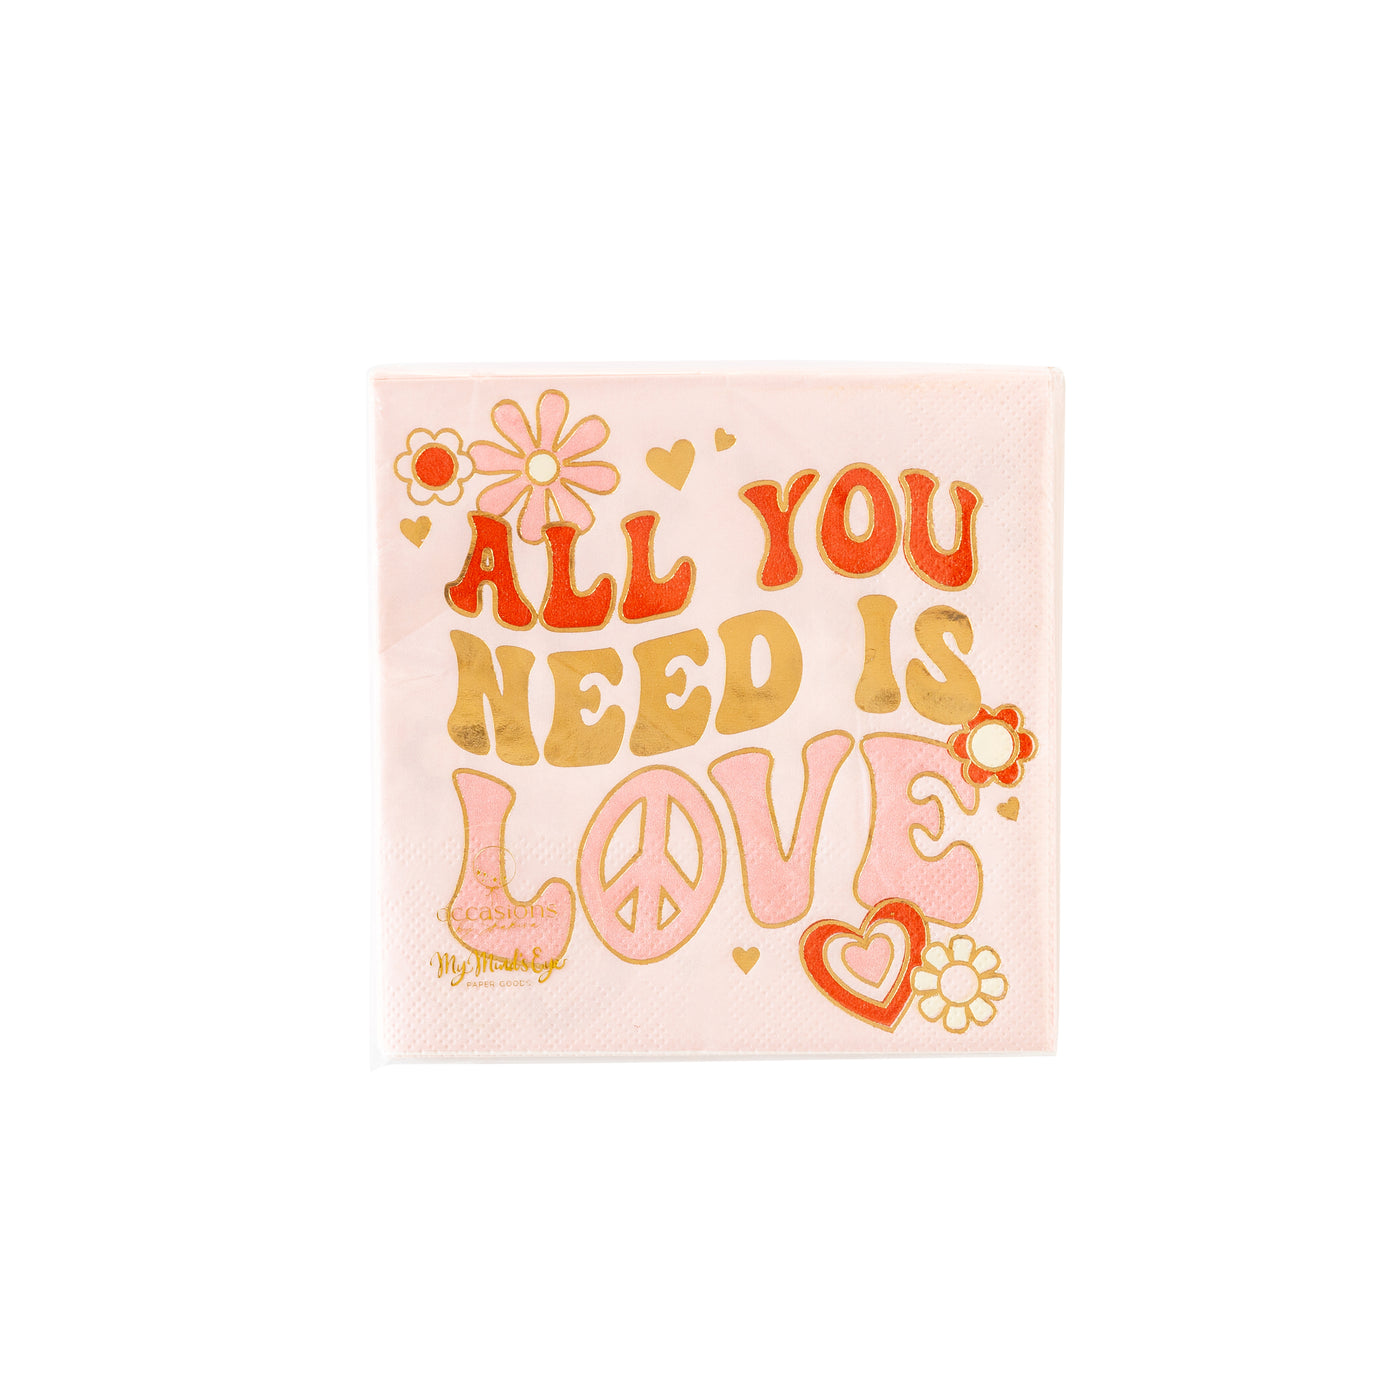 LUV1039 - Occasions by Shakira - All you Need is Love Napkin